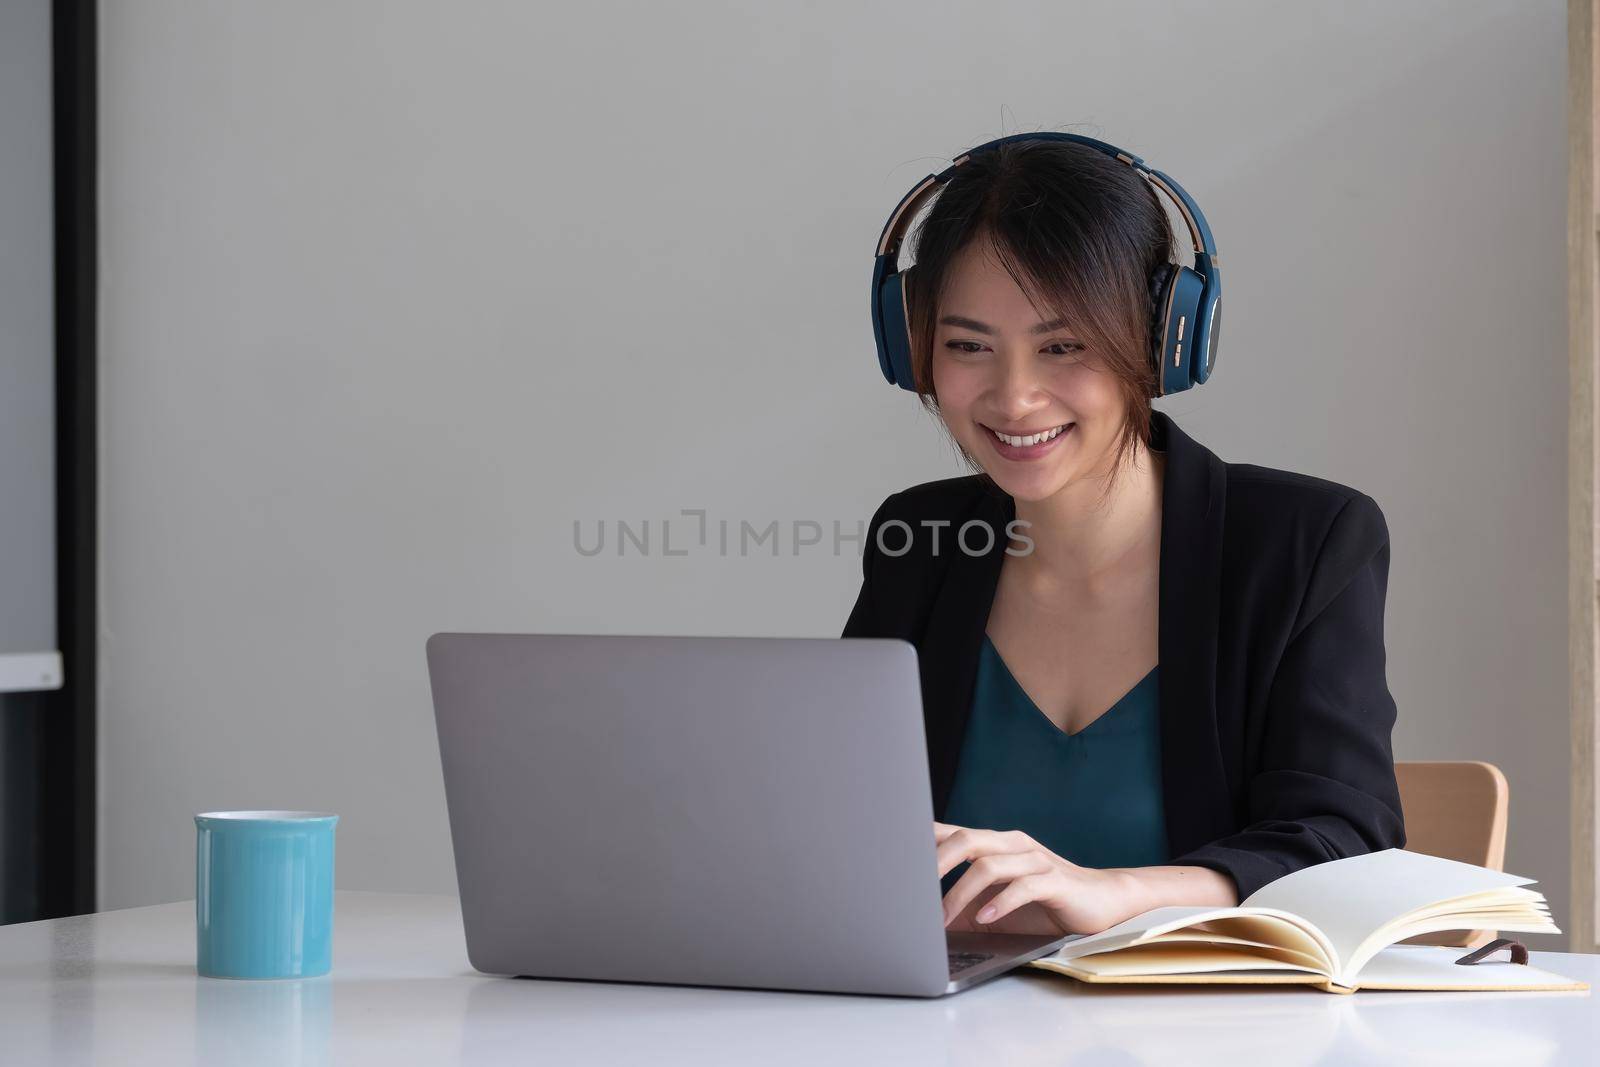 Happy asian woman wear headset laugh using laptop video stream conference call teach online, happy ethnic girl student gamer tutor have fun watch webinar web cam education entertainment concept by nateemee